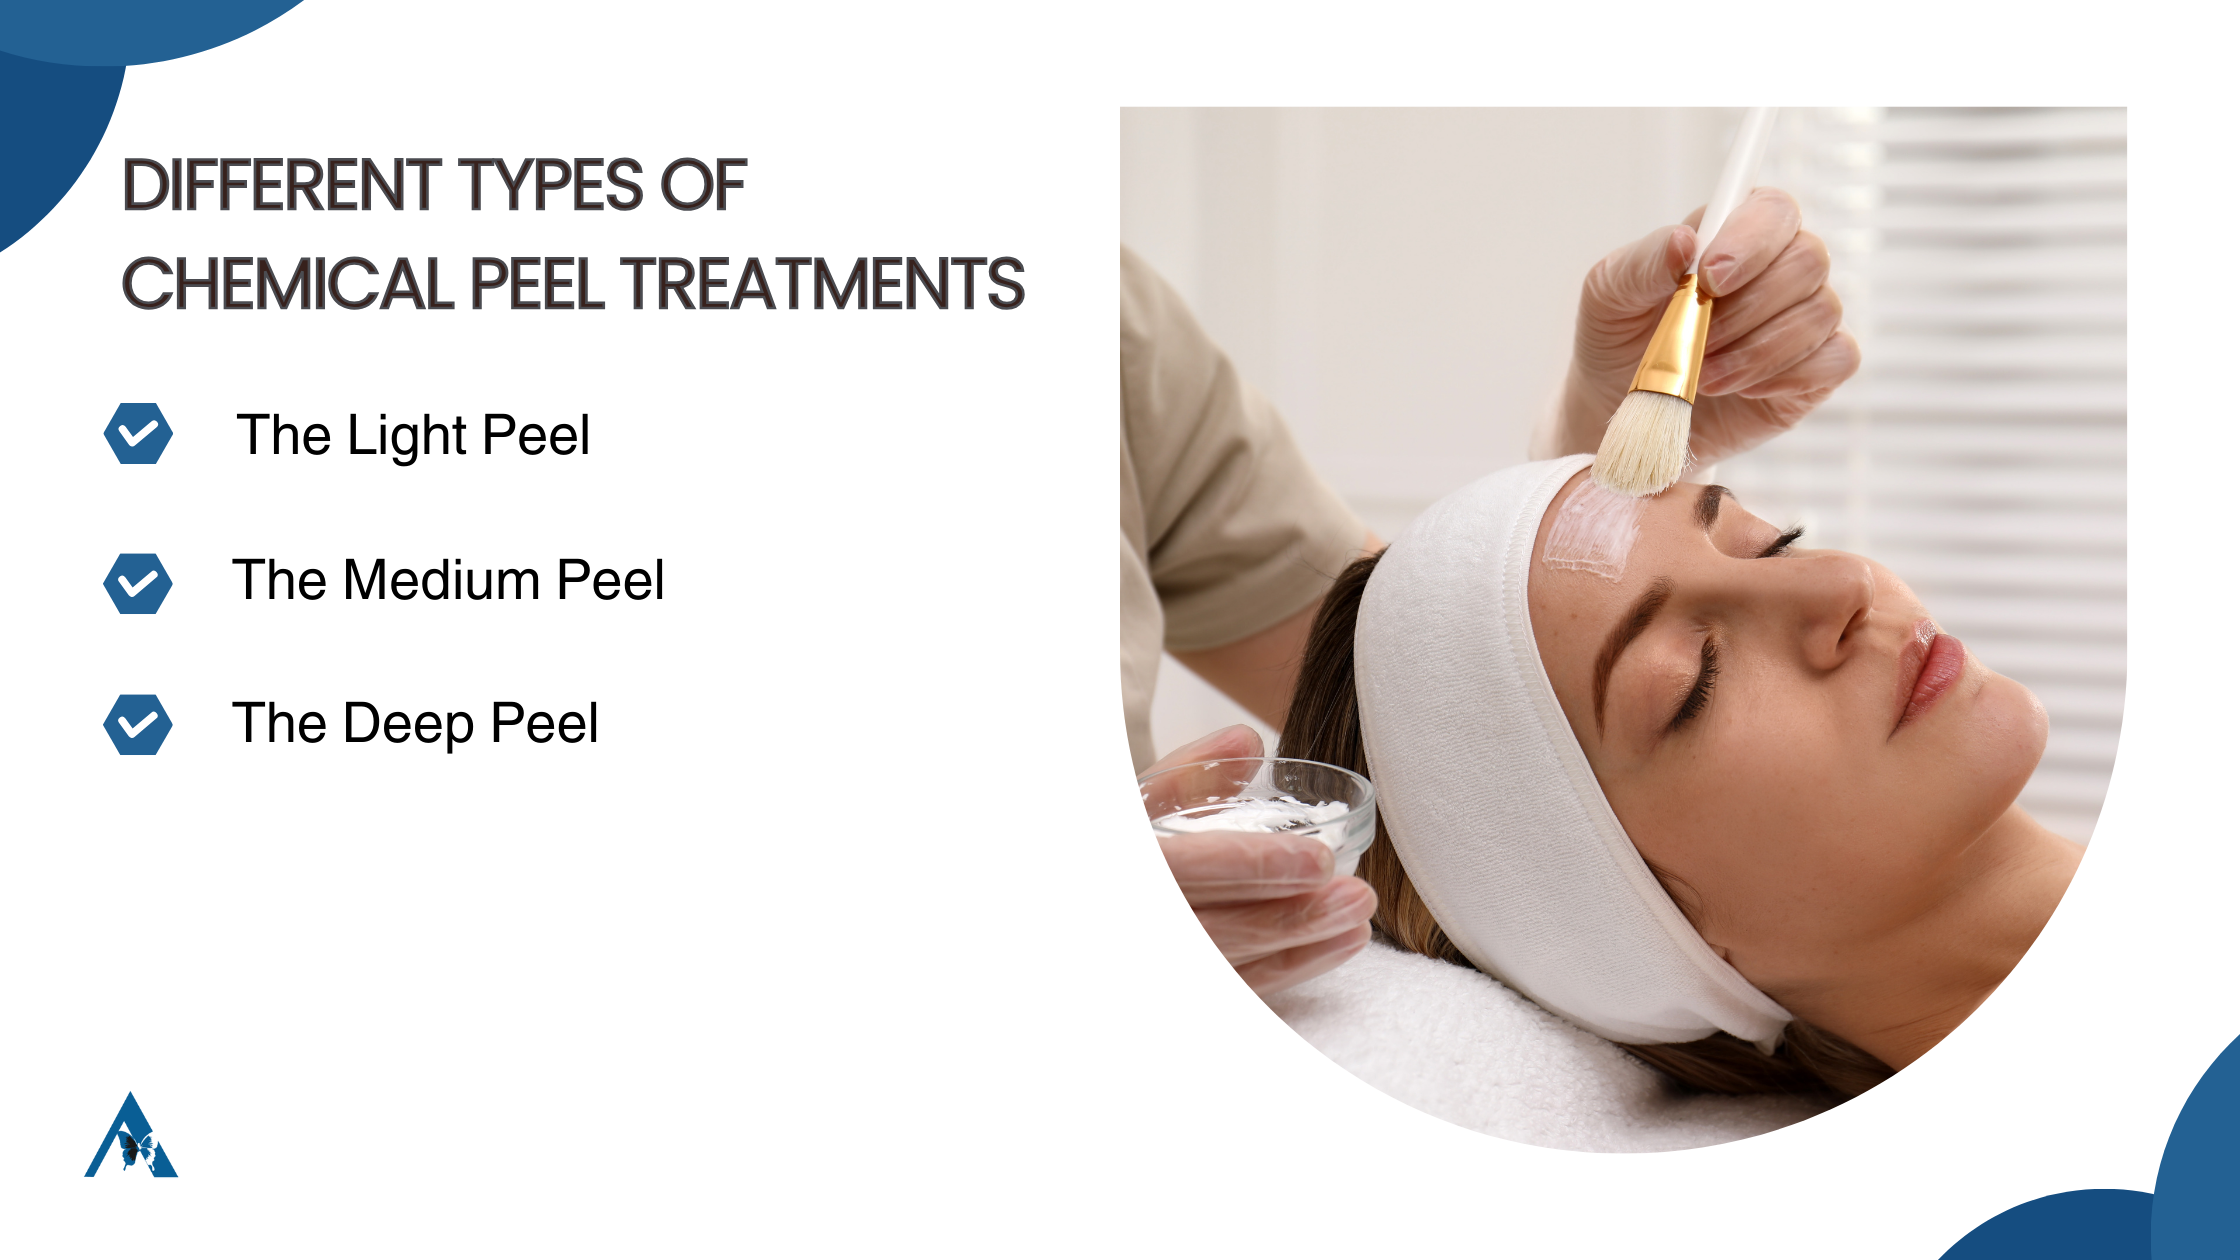 Different Types of Chemical Peel Treatments